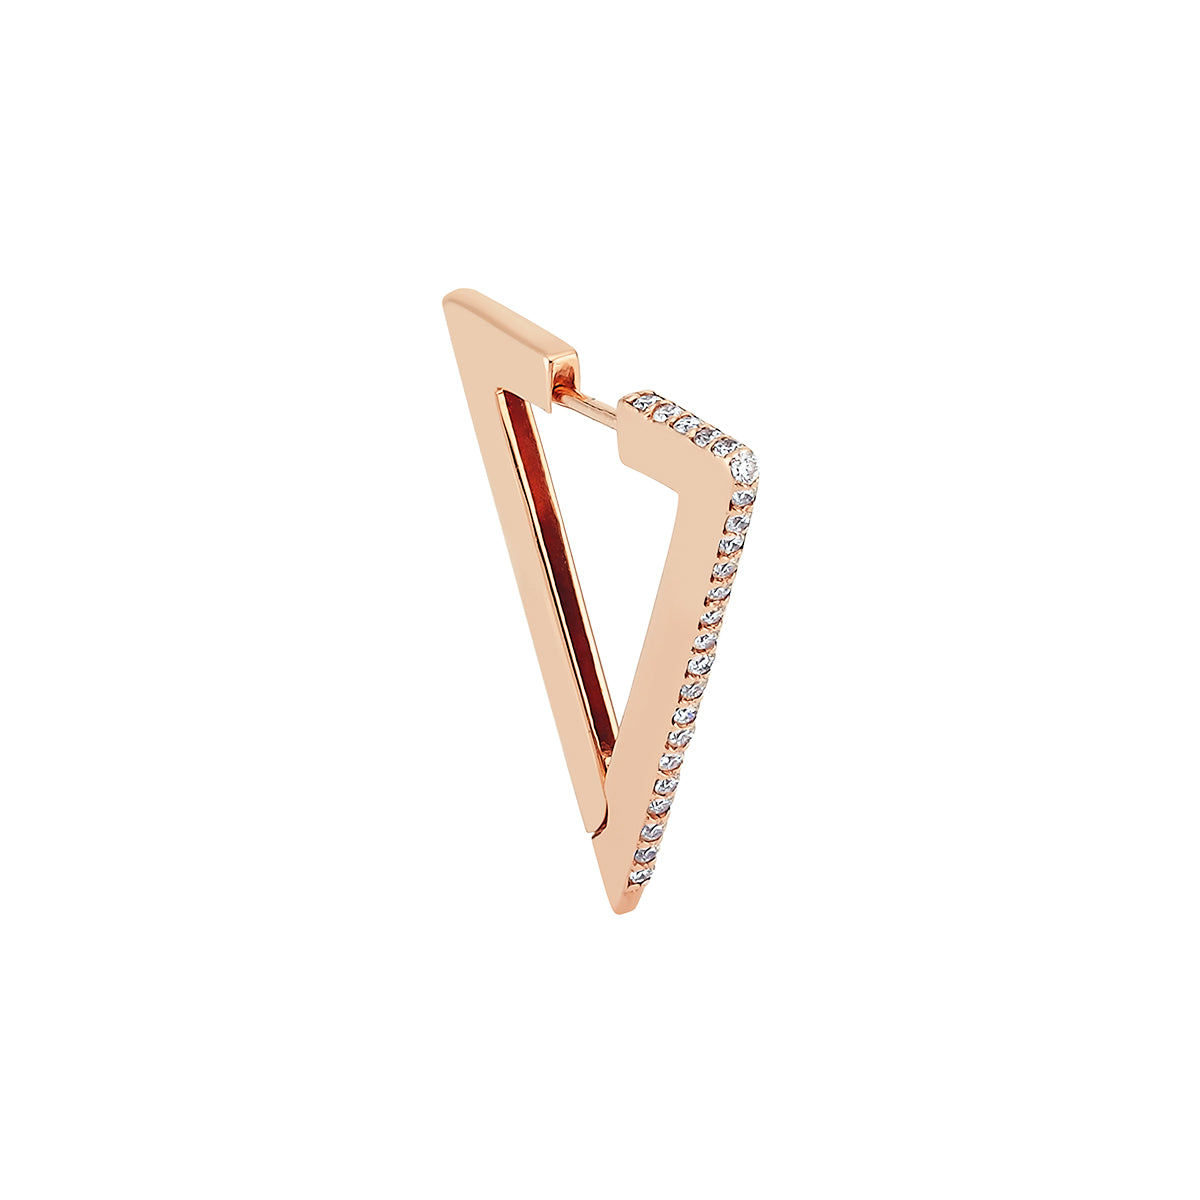 Trigon Earring in Rose Gold - Her Story Shop